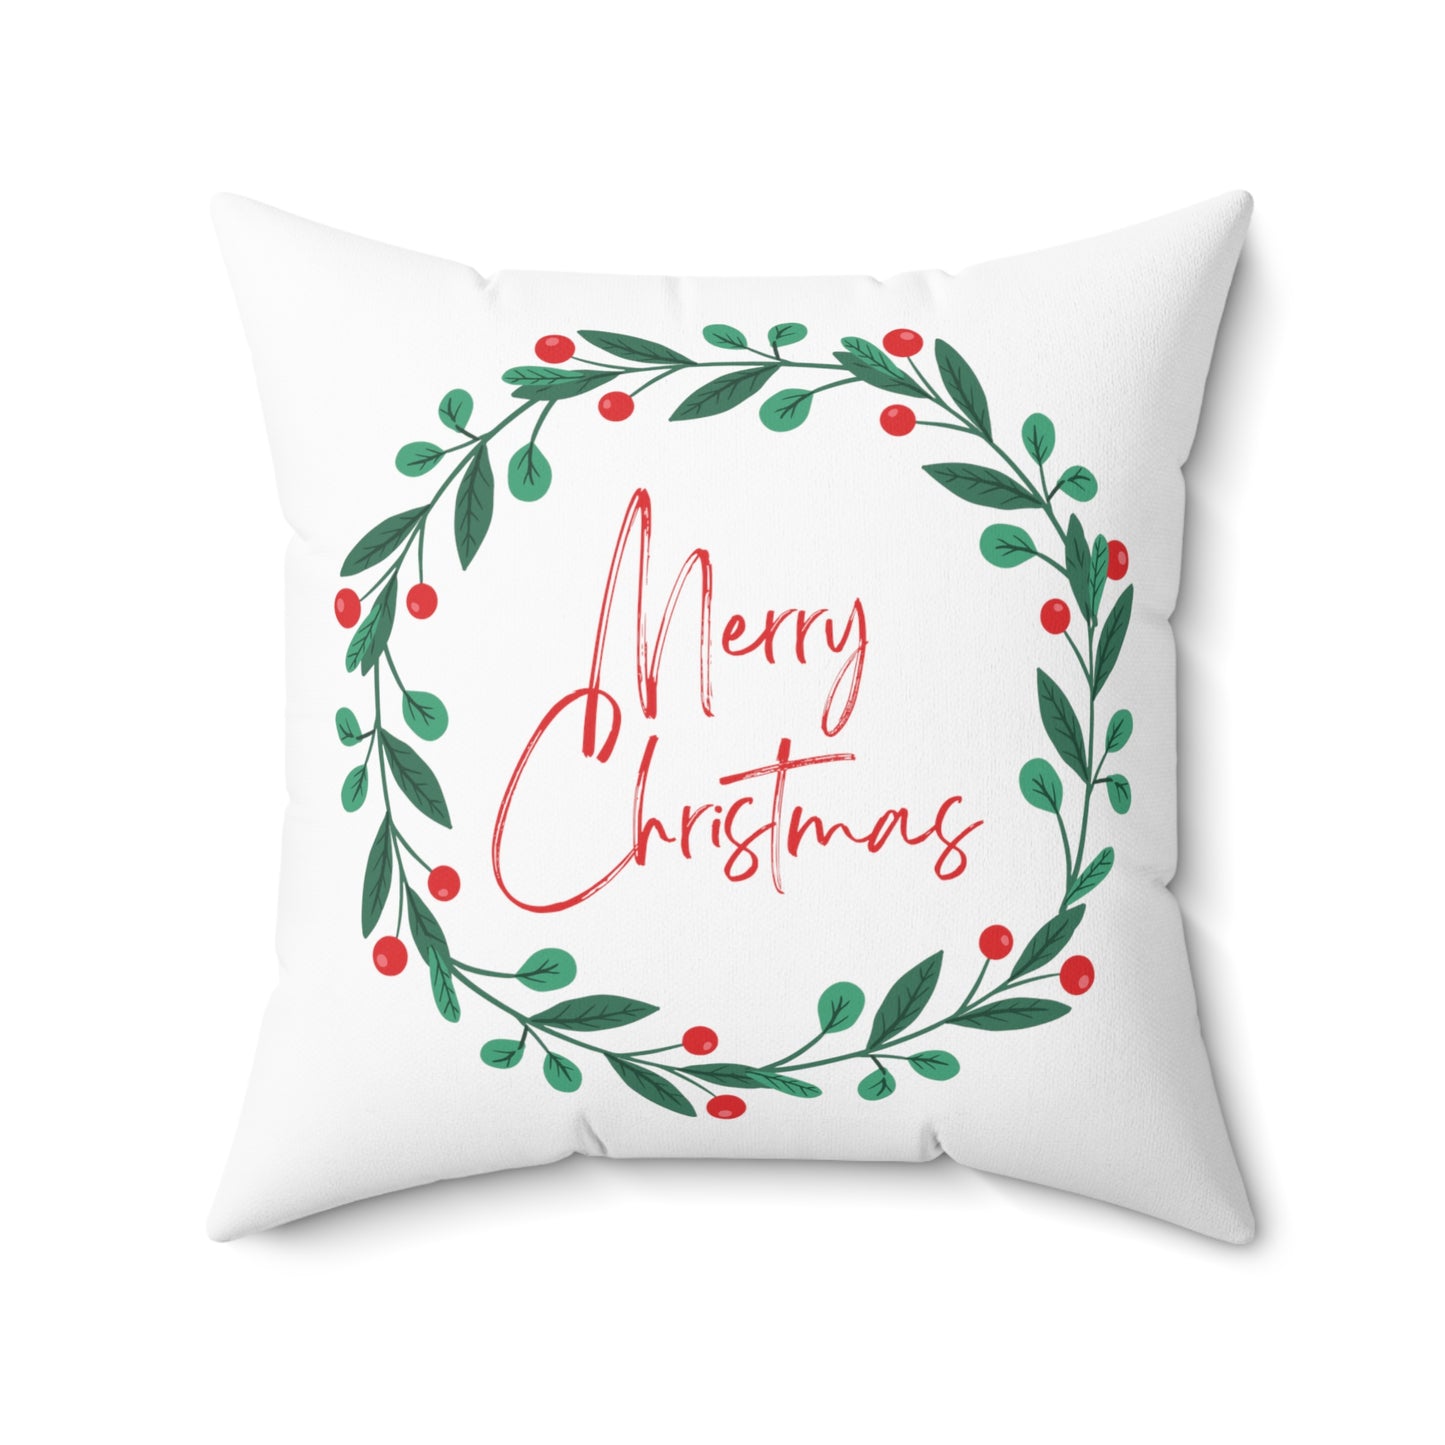 Merry Christmas Printed Polyester Square Pillow, White